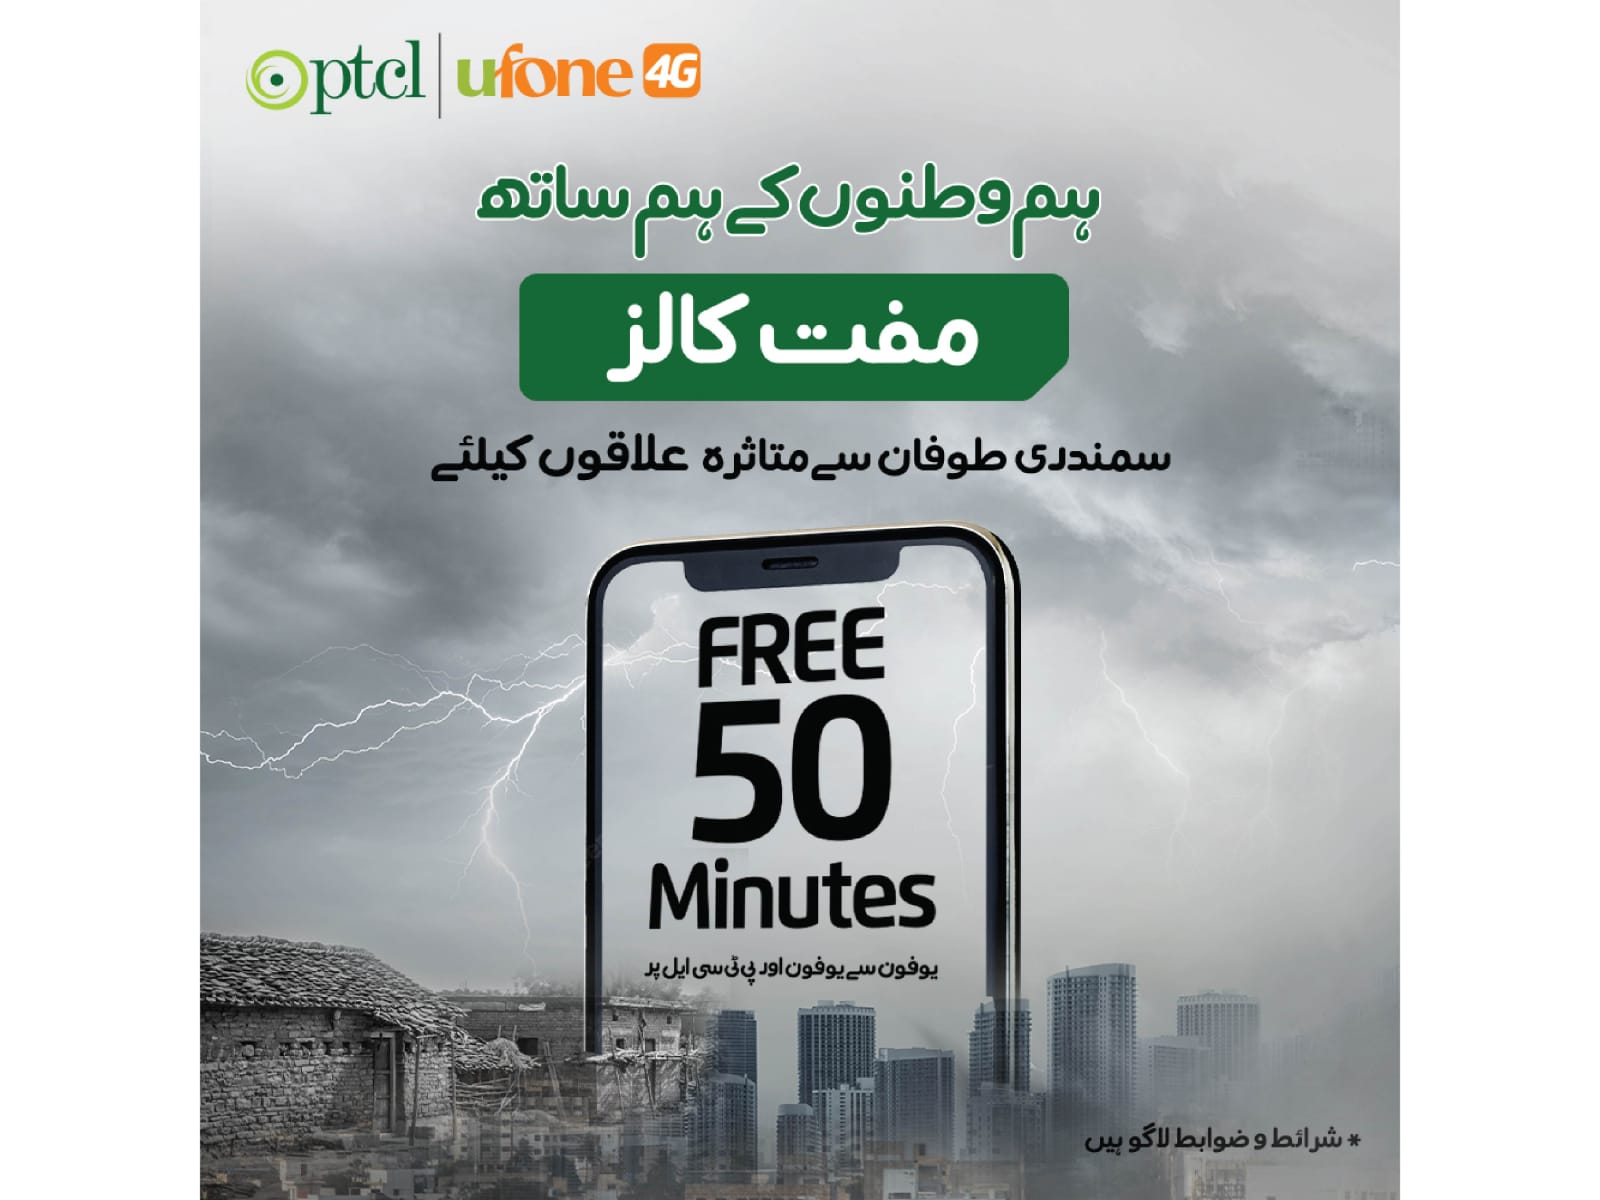 Ufone 4G is offering free minutes to the areas affected by the cyclone. This offer is for Ufone 4G users.